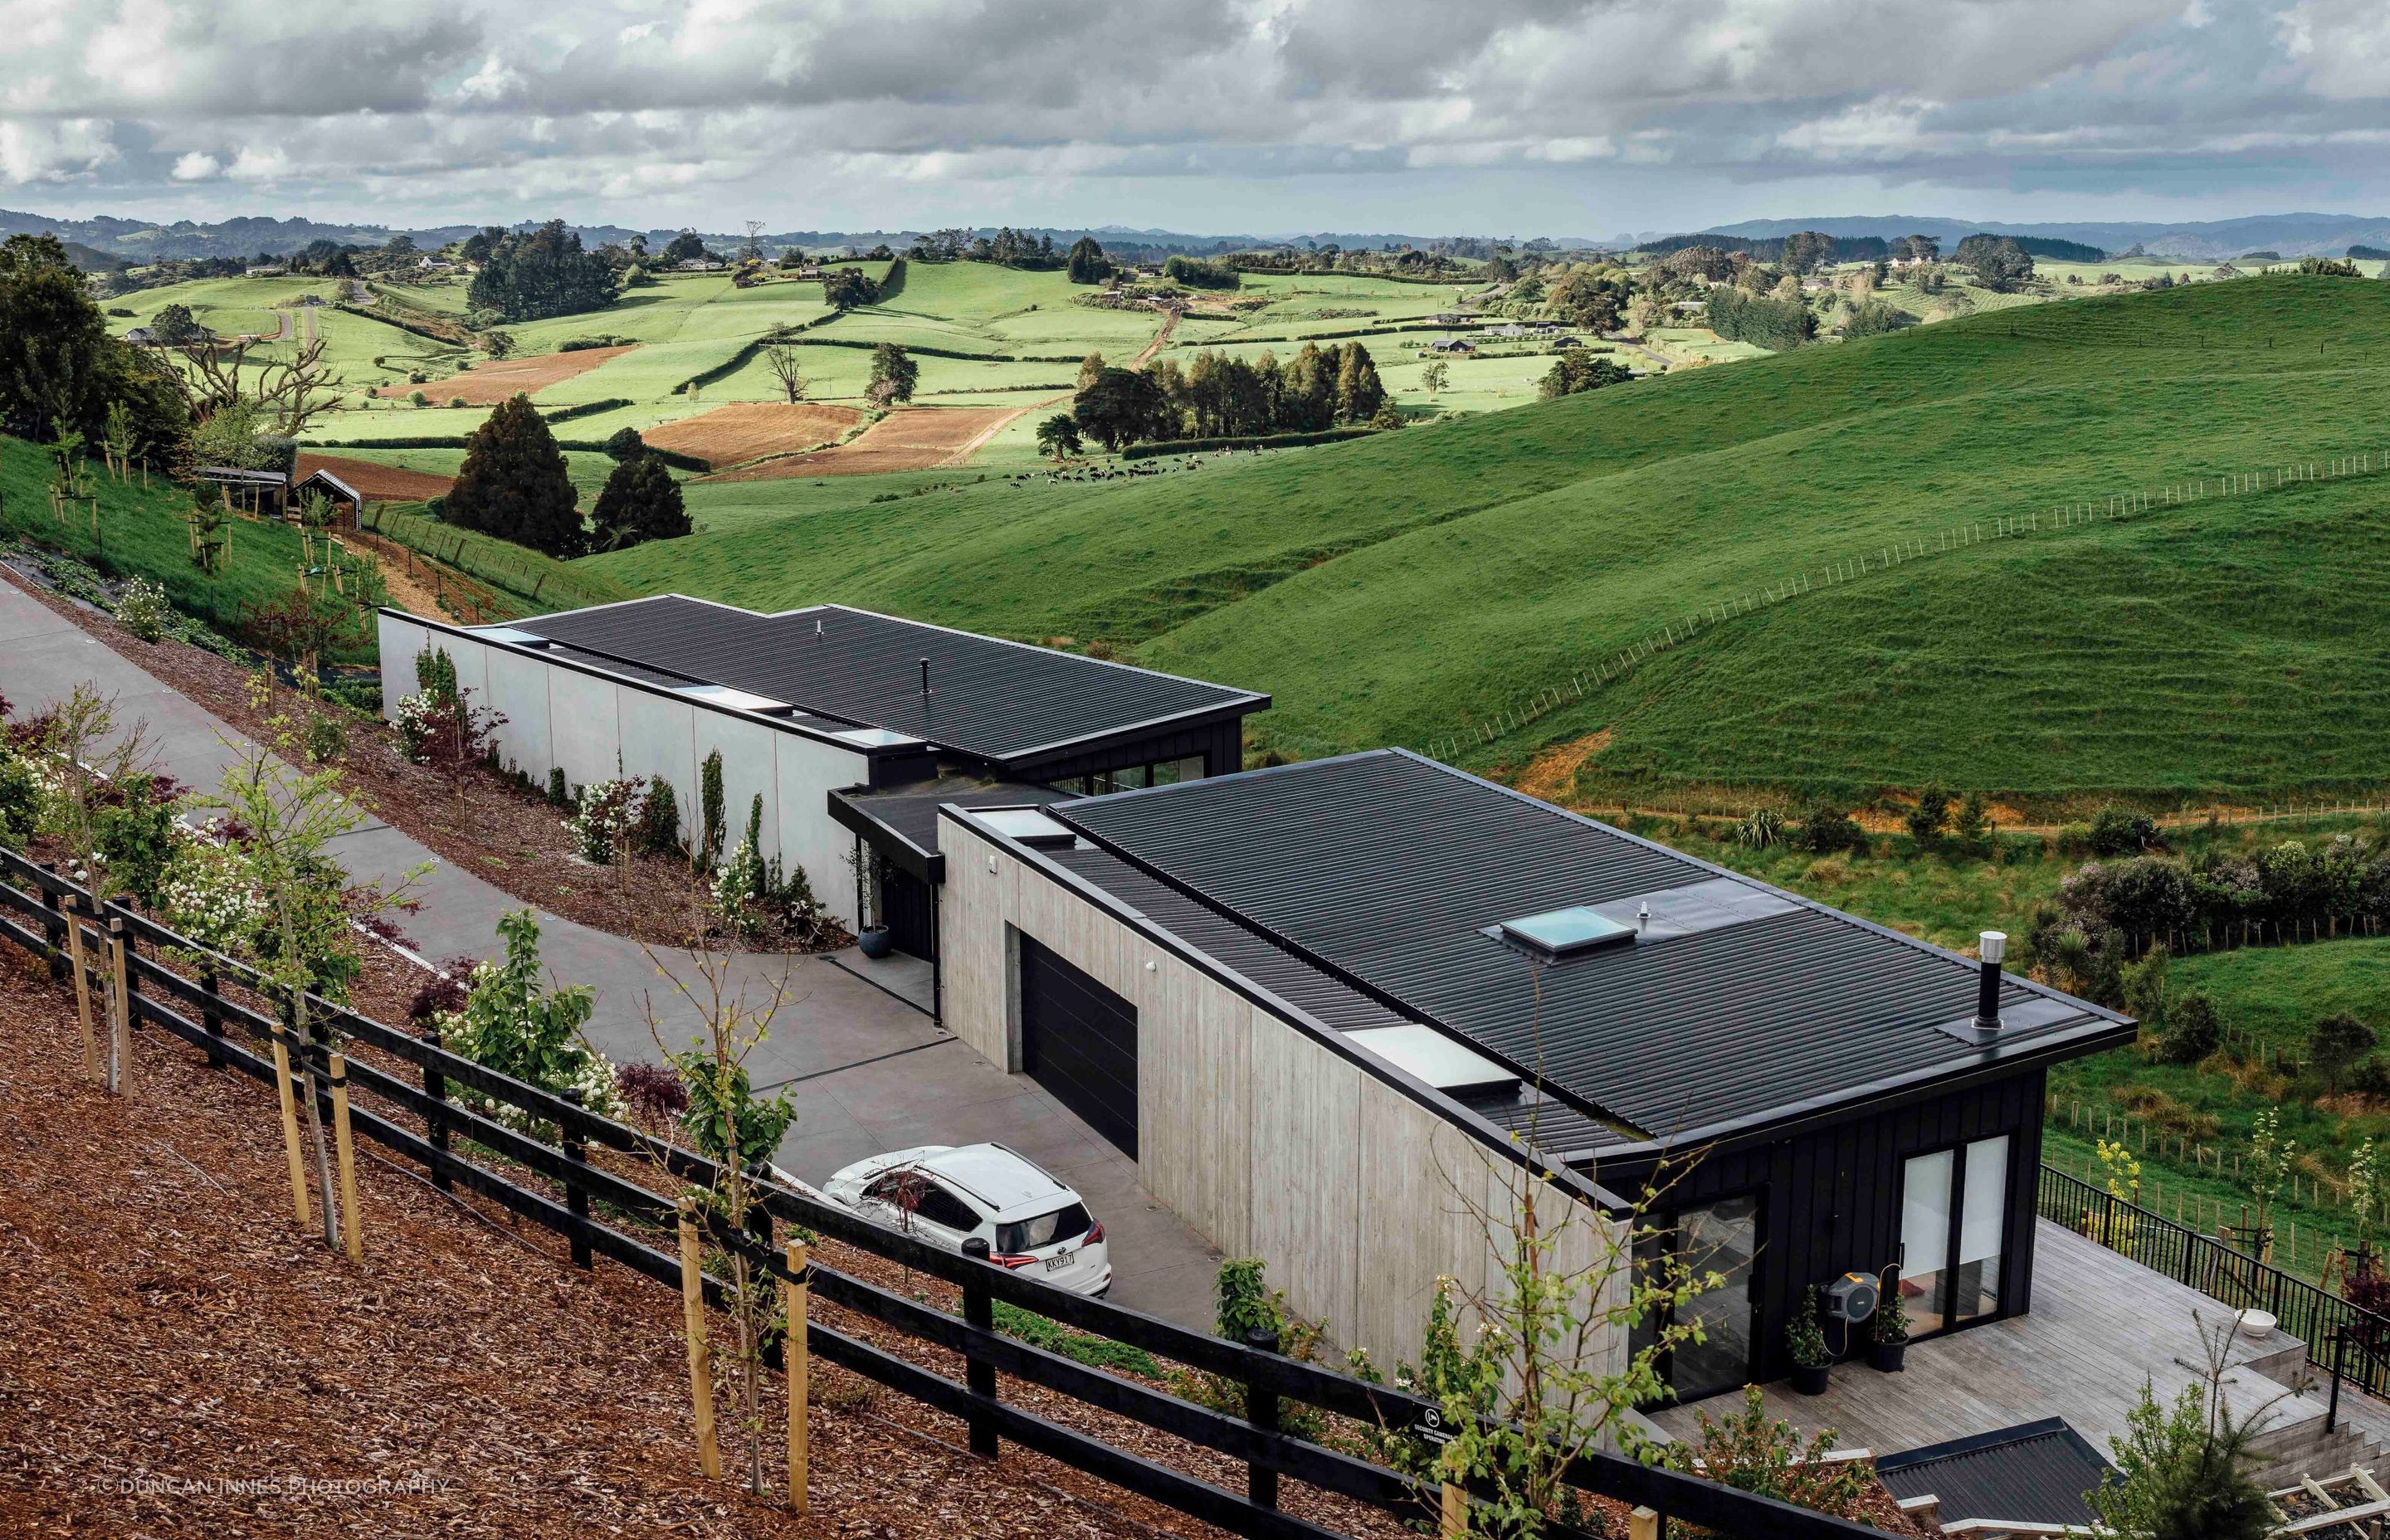 The robust concrete spine allows the house to open out to the rural views. The hard part of any build, says Brendon, is in the last few days when the clients are itching to move in before it’s quite finished.